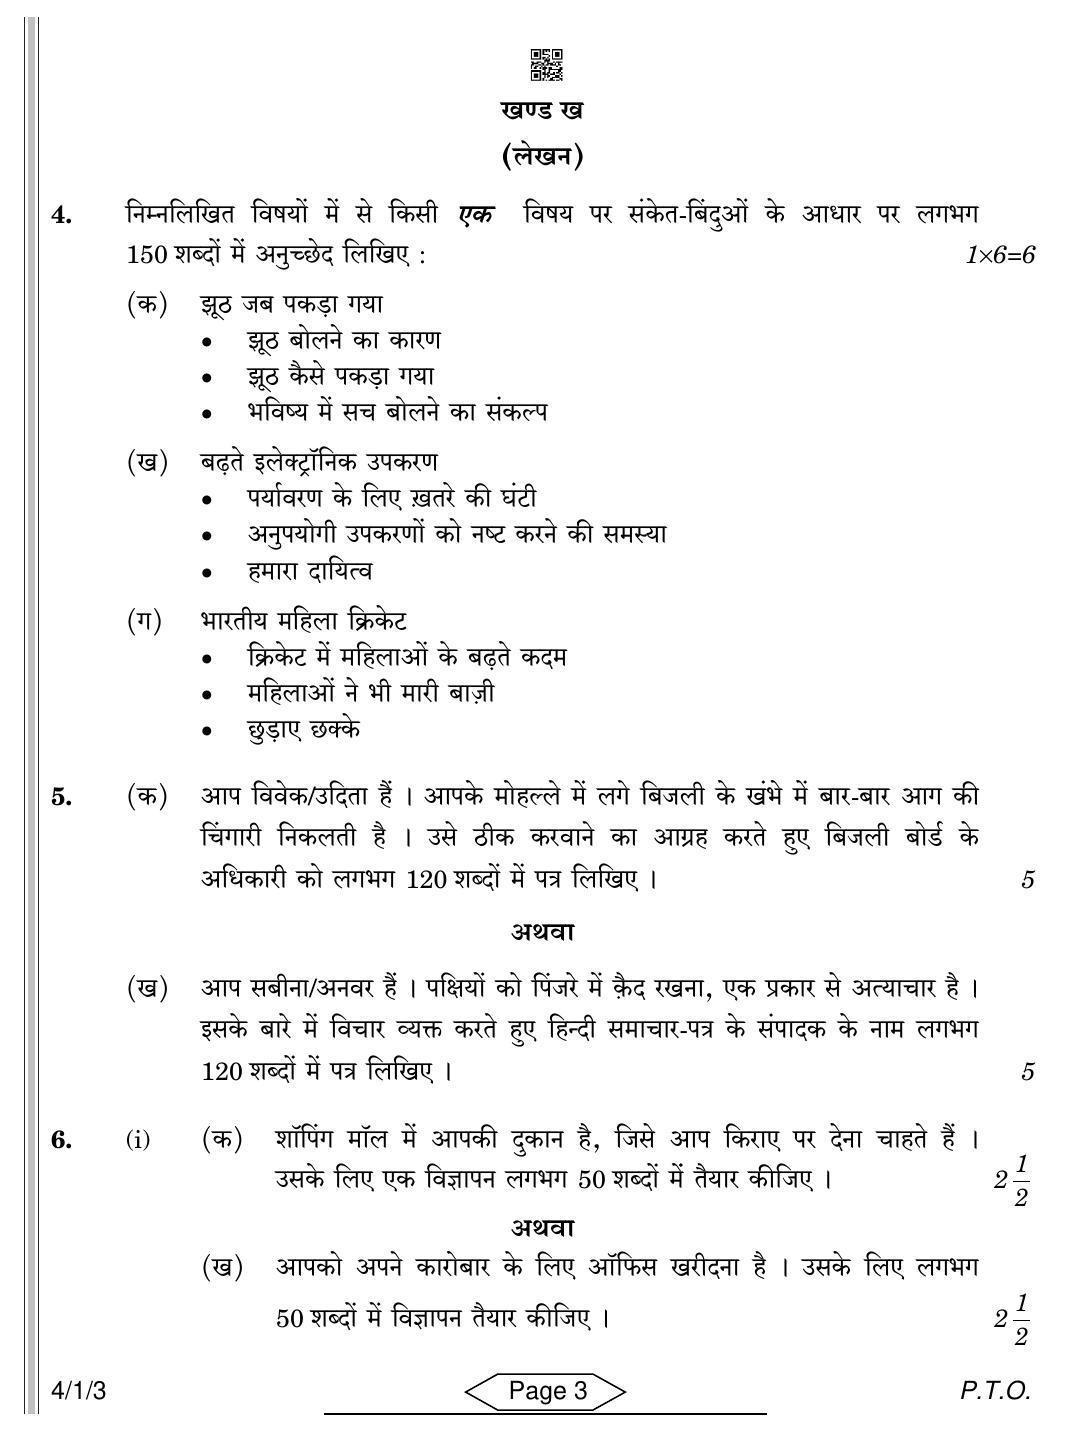 CBSE Class 10 4-1-3 Hindi B 2022 Question Paper - Page 3